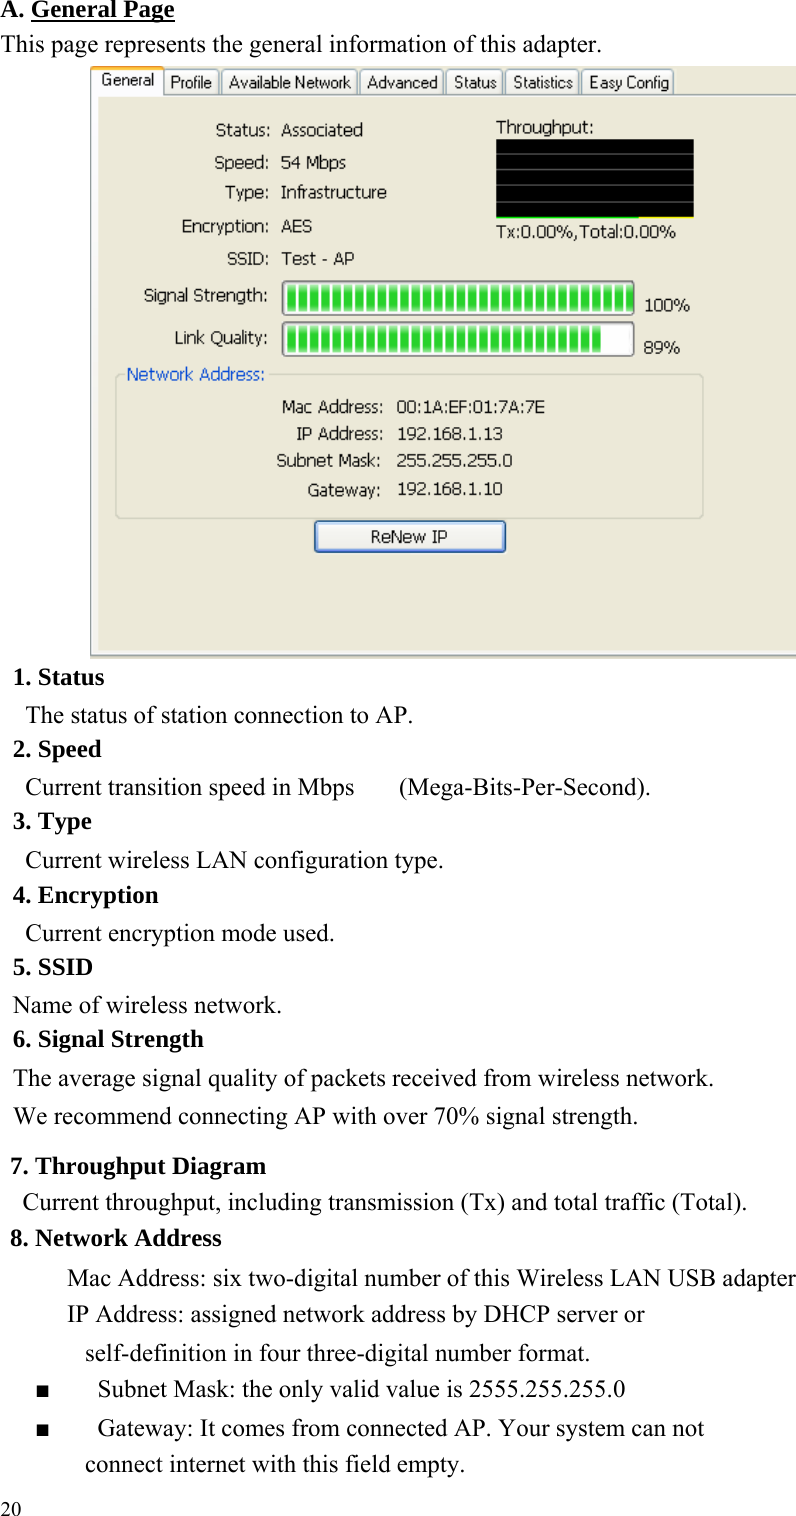 A. General PageThis page represents the general information of this adapter.                                1. Status The status of station connection to AP.     2. Speed Current transition speed in Mbps (Mega-Bits-Per-Second). 3. Type Current wireless LAN configuration type. 4. Encryption Current encryption mode used. 5. SSID Name of wireless network. 6. Signal Strength The average signal quality of packets received from wireless network.     We recommend connecting AP with over 70% signal strength.     7. Throughput Diagram Current throughput, including transmission (Tx) and total traffic (Total).     8. Network Address Mac Address: six two-digital number of this Wireless LAN USB adapter     IP Address: assigned network address by DHCP server or     self-definition in four three-digital number format. ■  Subnet Mask: the only valid value is 2555.255.255.0 ■  Gateway: It comes from connected AP. Your system can not     connect internet with this field empty.     20 